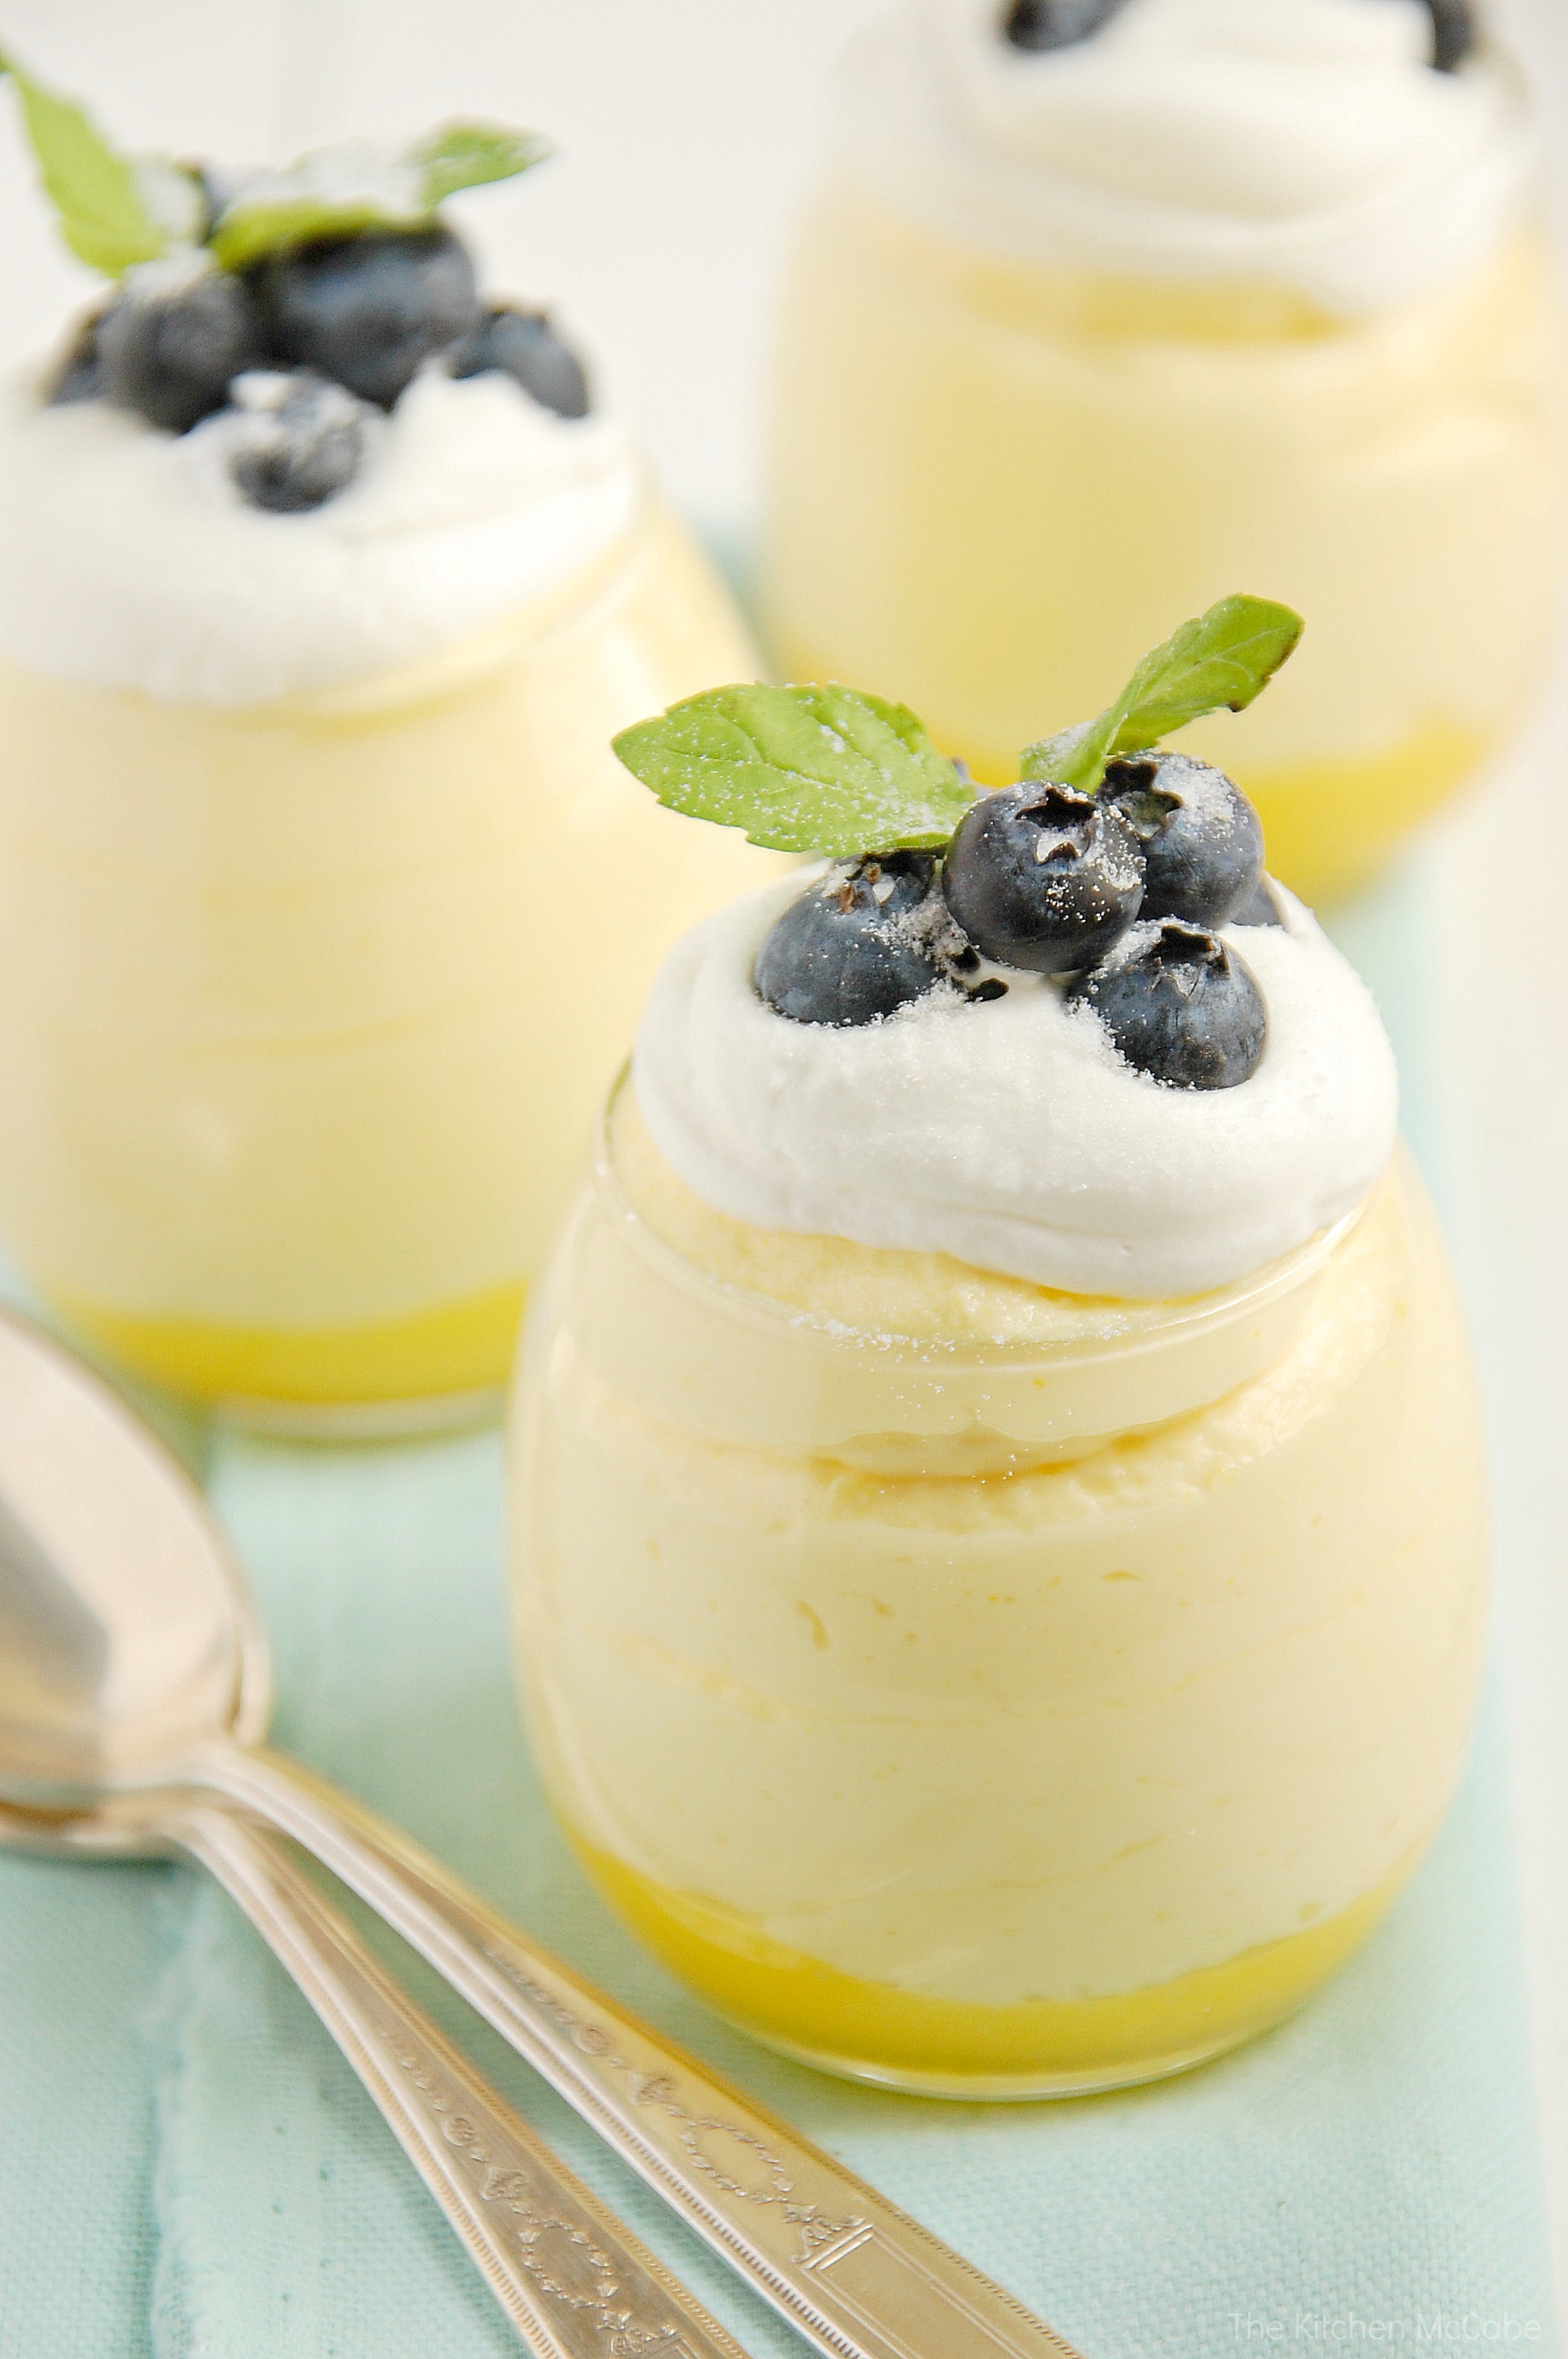 Lemon Curd Mousse with Blueberries 3 - The Kitchen McCabe